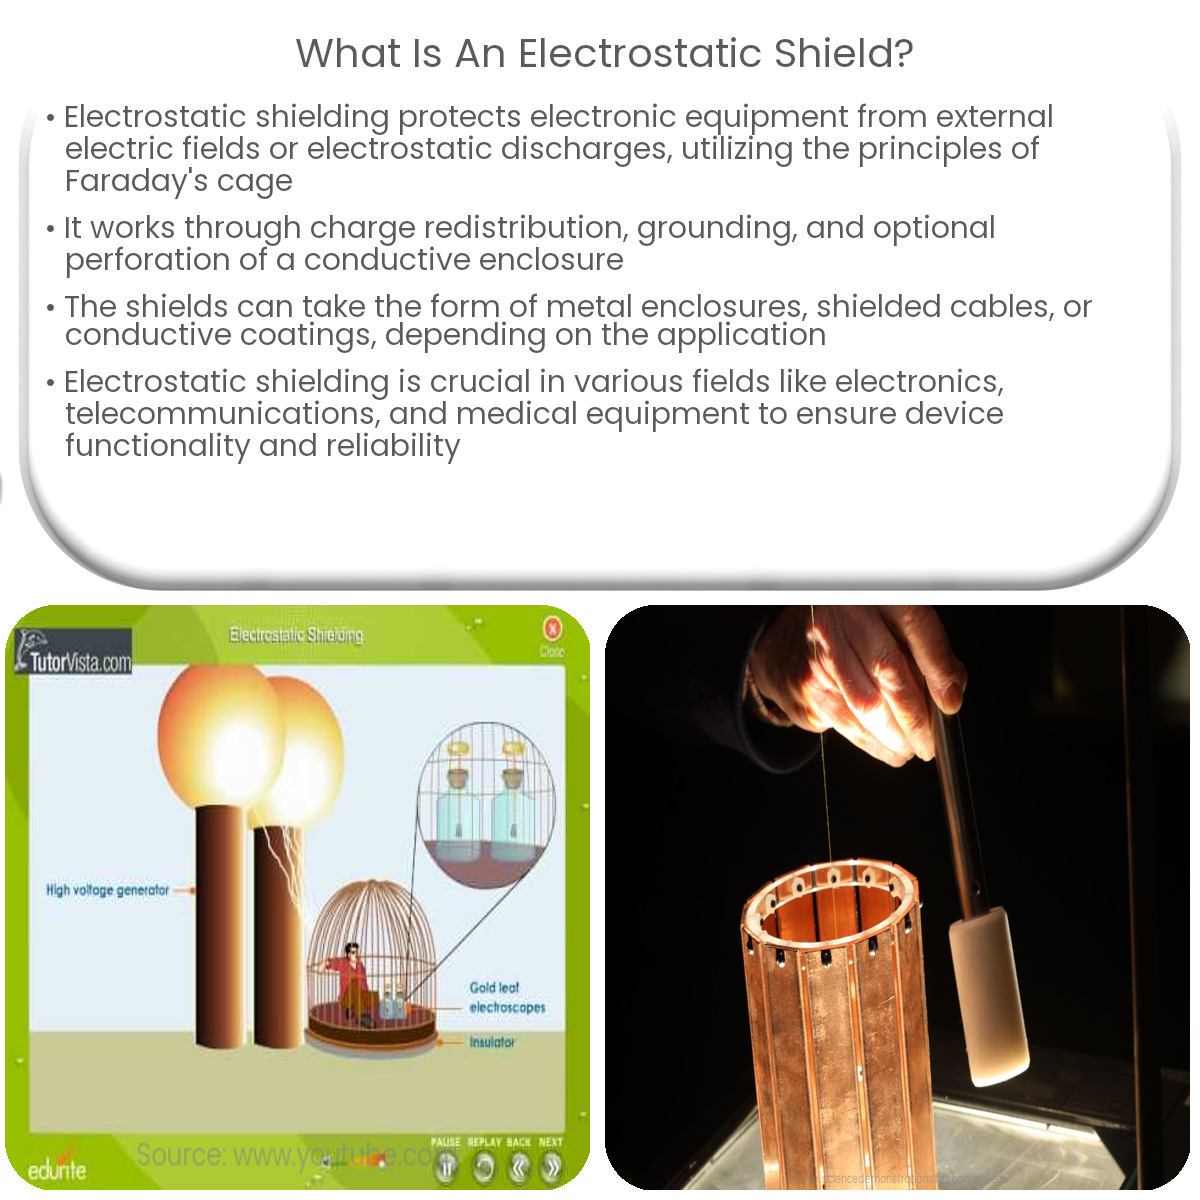 What is an electrostatic shield?